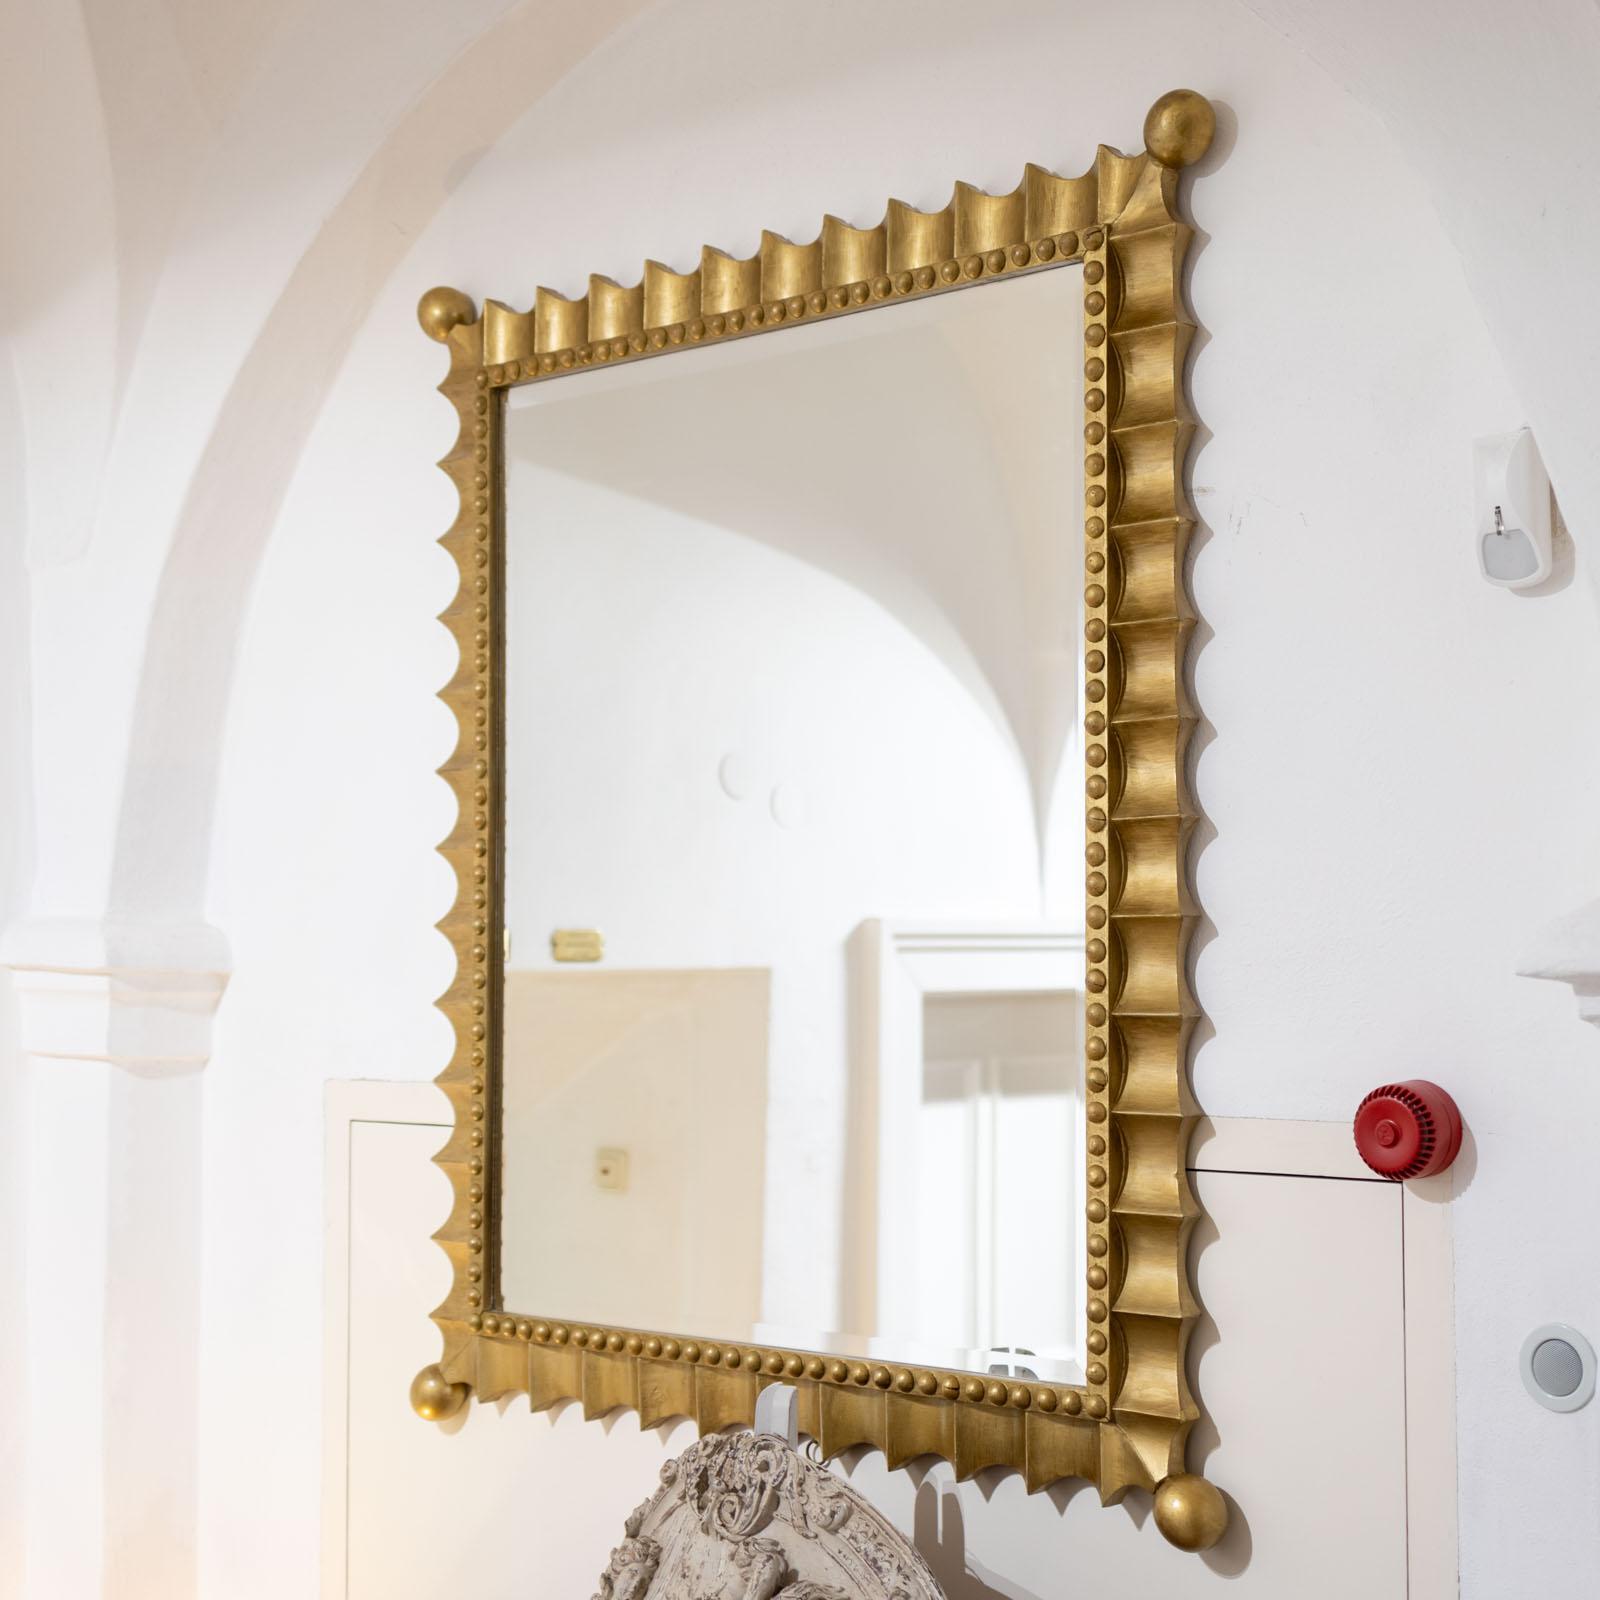 Large wall mirror in a gold-patinated frame with a wavy edge with pearl decoration. The corners end in spheres. The golden patina is in good, slightly rubbed condition.